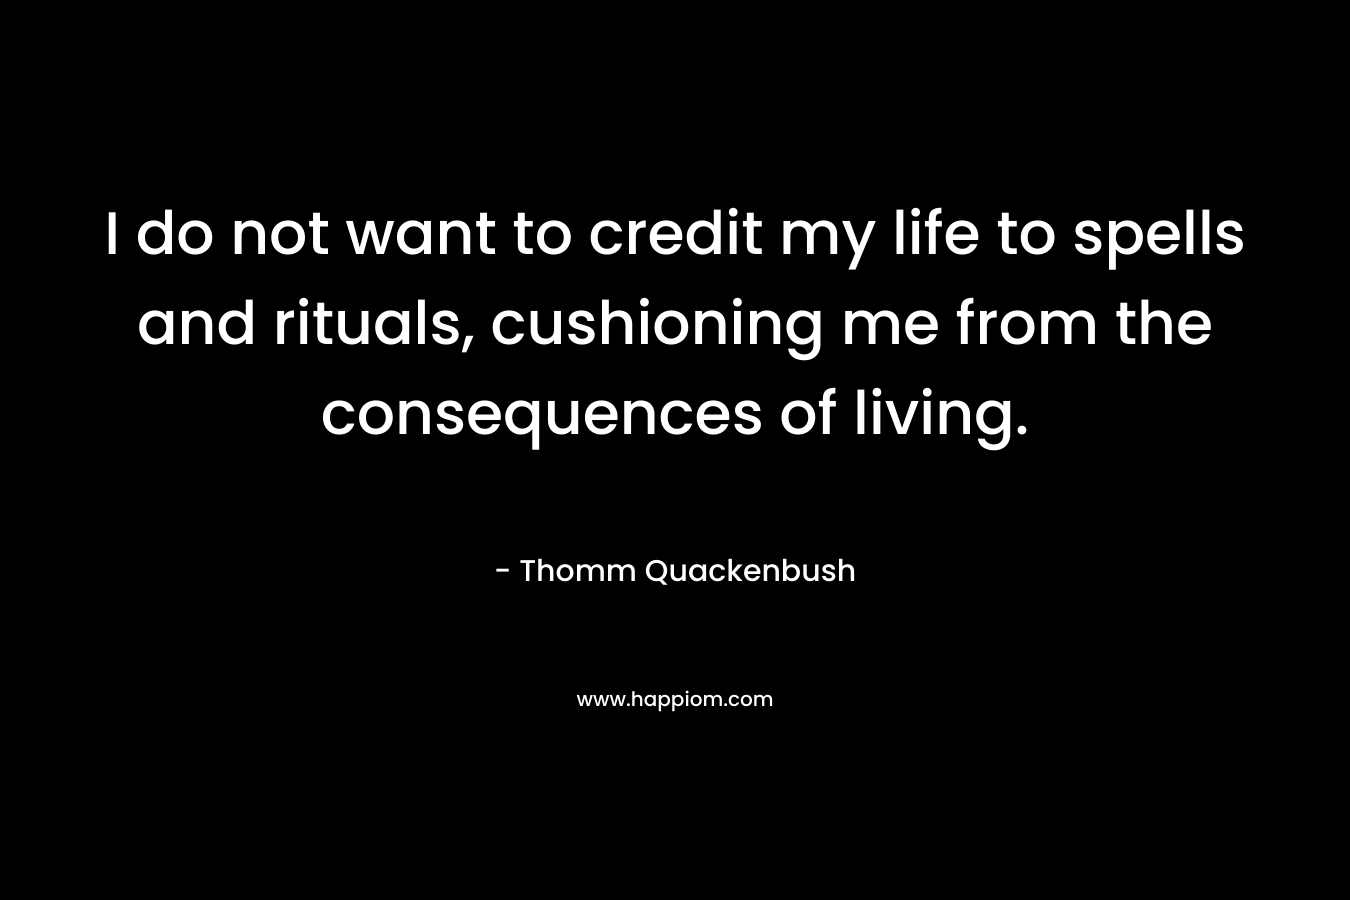 I do not want to credit my life to spells and rituals, cushioning me from the consequences of living. – Thomm Quackenbush